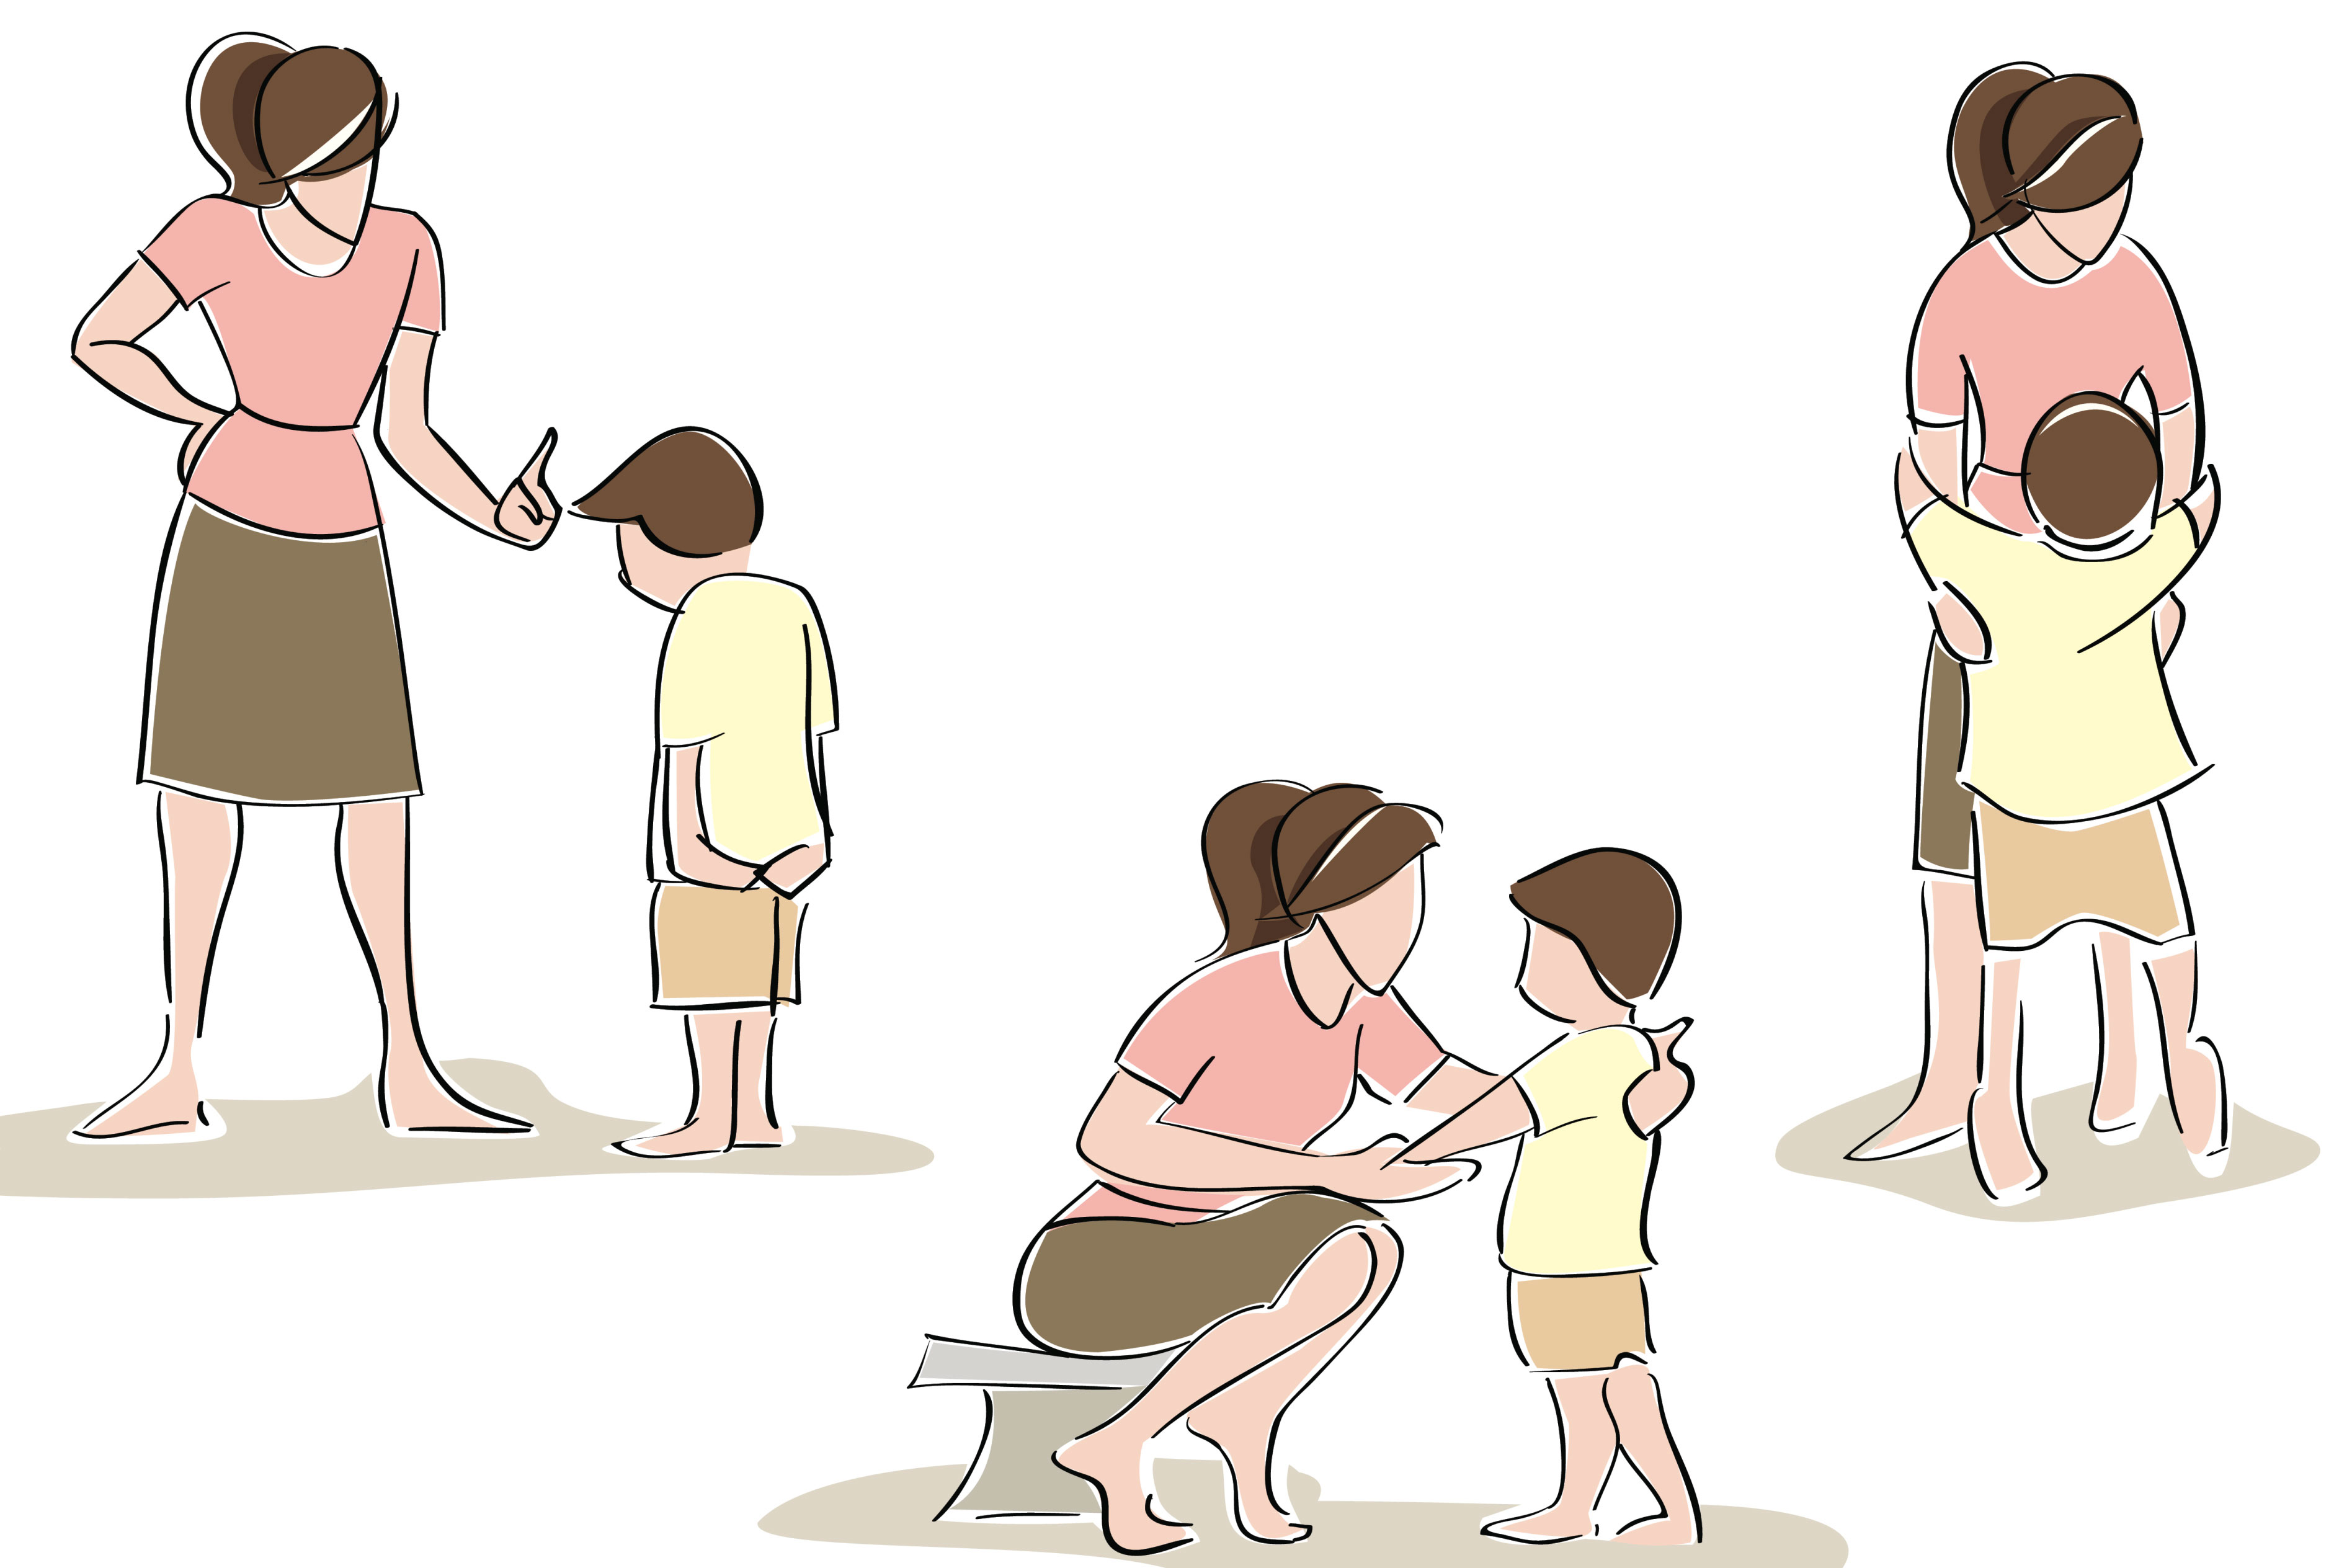 Illustration of a mom scolding her son, talking to her son, and hugging her son